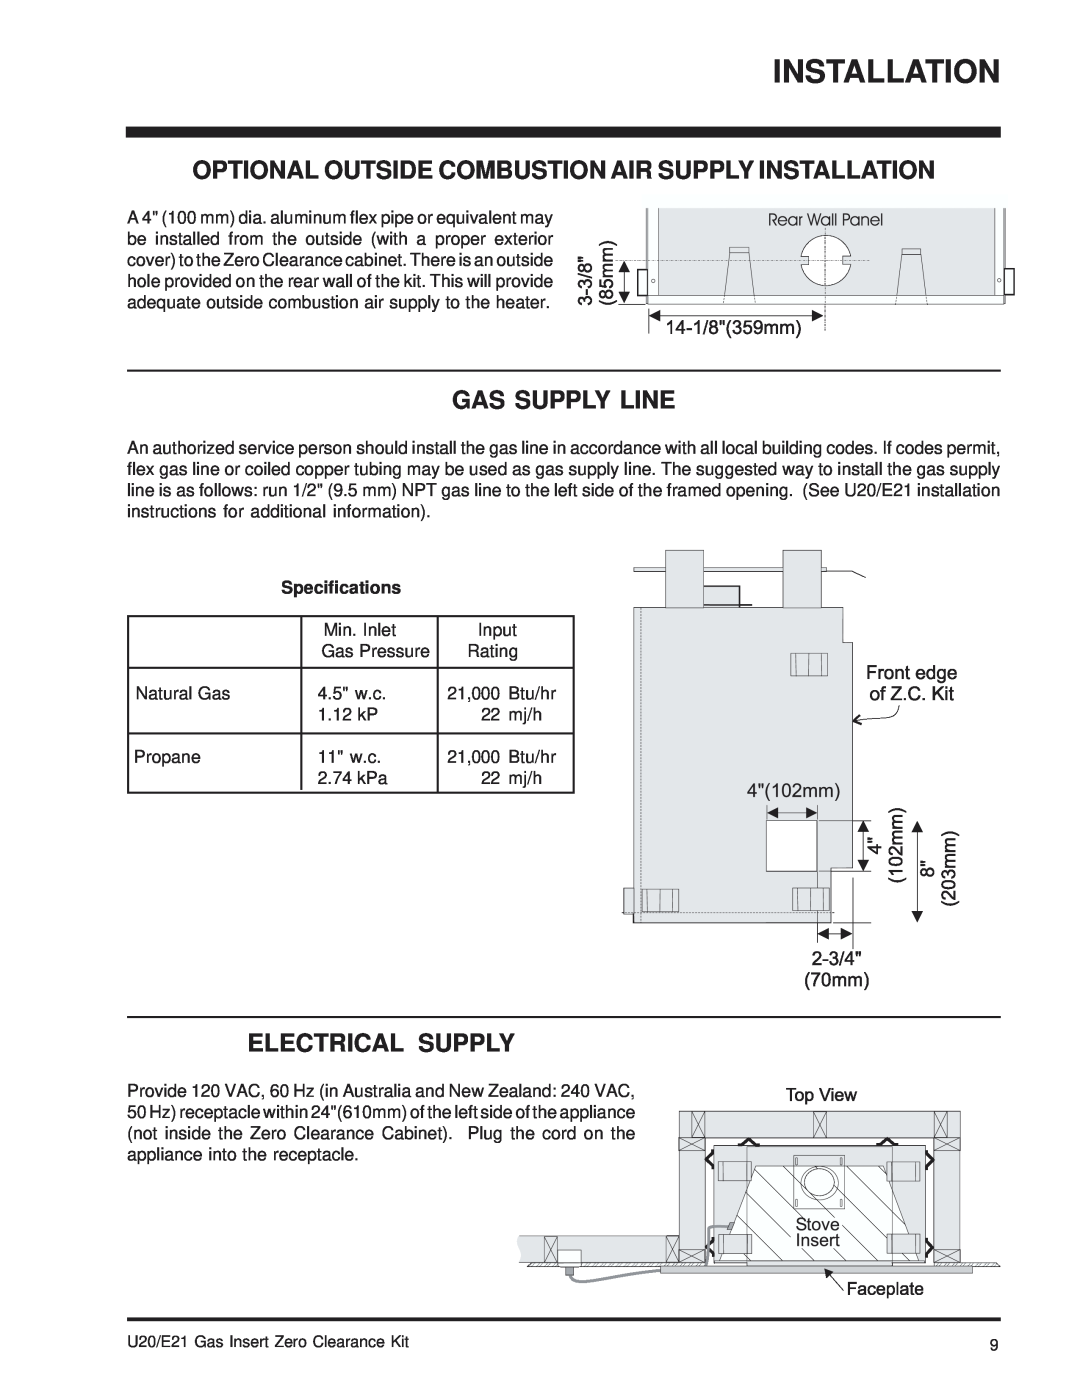 Regency E21, U20 installation manual Gas Supply Line, Electrical Supply, Installation, Specifications 